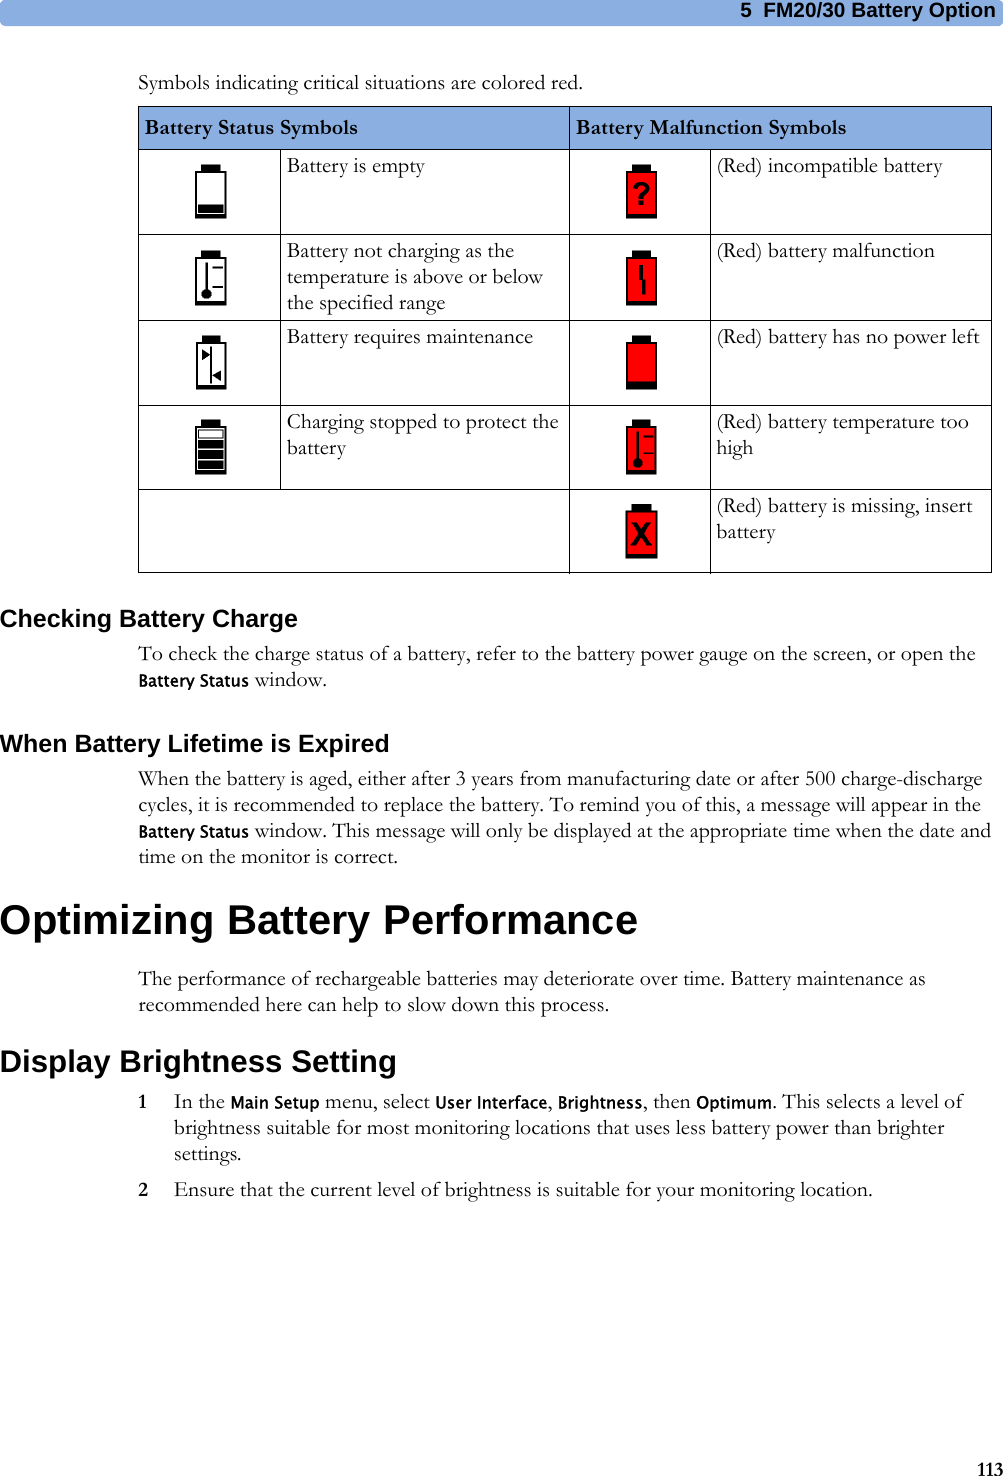 5  FM20/30 Battery Option113Symbols indicating critical situations are colored red.Checking Battery ChargeTo check the charge status of a battery, refer to the battery power gauge on the screen, or open the Battery Status window.When Battery Lifetime is ExpiredWhen the battery is aged, either after 3 years from manufacturing date or after 500 charge-discharge cycles, it is recommended to replace the battery. To remind you of this, a message will appear in the Battery Status window. This message will only be displayed at the appropriate time when the date and time on the monitor is correct.Optimizing Battery PerformanceThe performance of rechargeable batteries may deteriorate over time. Battery maintenance as recommended here can help to slow down this process.Display Brightness Setting1In the Main Setup menu, select User Interface, Brightness, then Optimum. This selects a level of brightness suitable for most monitoring locations that uses less battery power than brighter settings.2Ensure that the current level of brightness is suitable for your monitoring location.Battery Status Symbols Battery Malfunction SymbolsBattery is empty (Red) incompatible batteryBattery not charging as the temperature is above or below the specified range(Red) battery malfunctionBattery requires maintenance (Red) battery has no power leftCharging stopped to protect the battery(Red) battery temperature too high(Red) battery is missing, insert battery